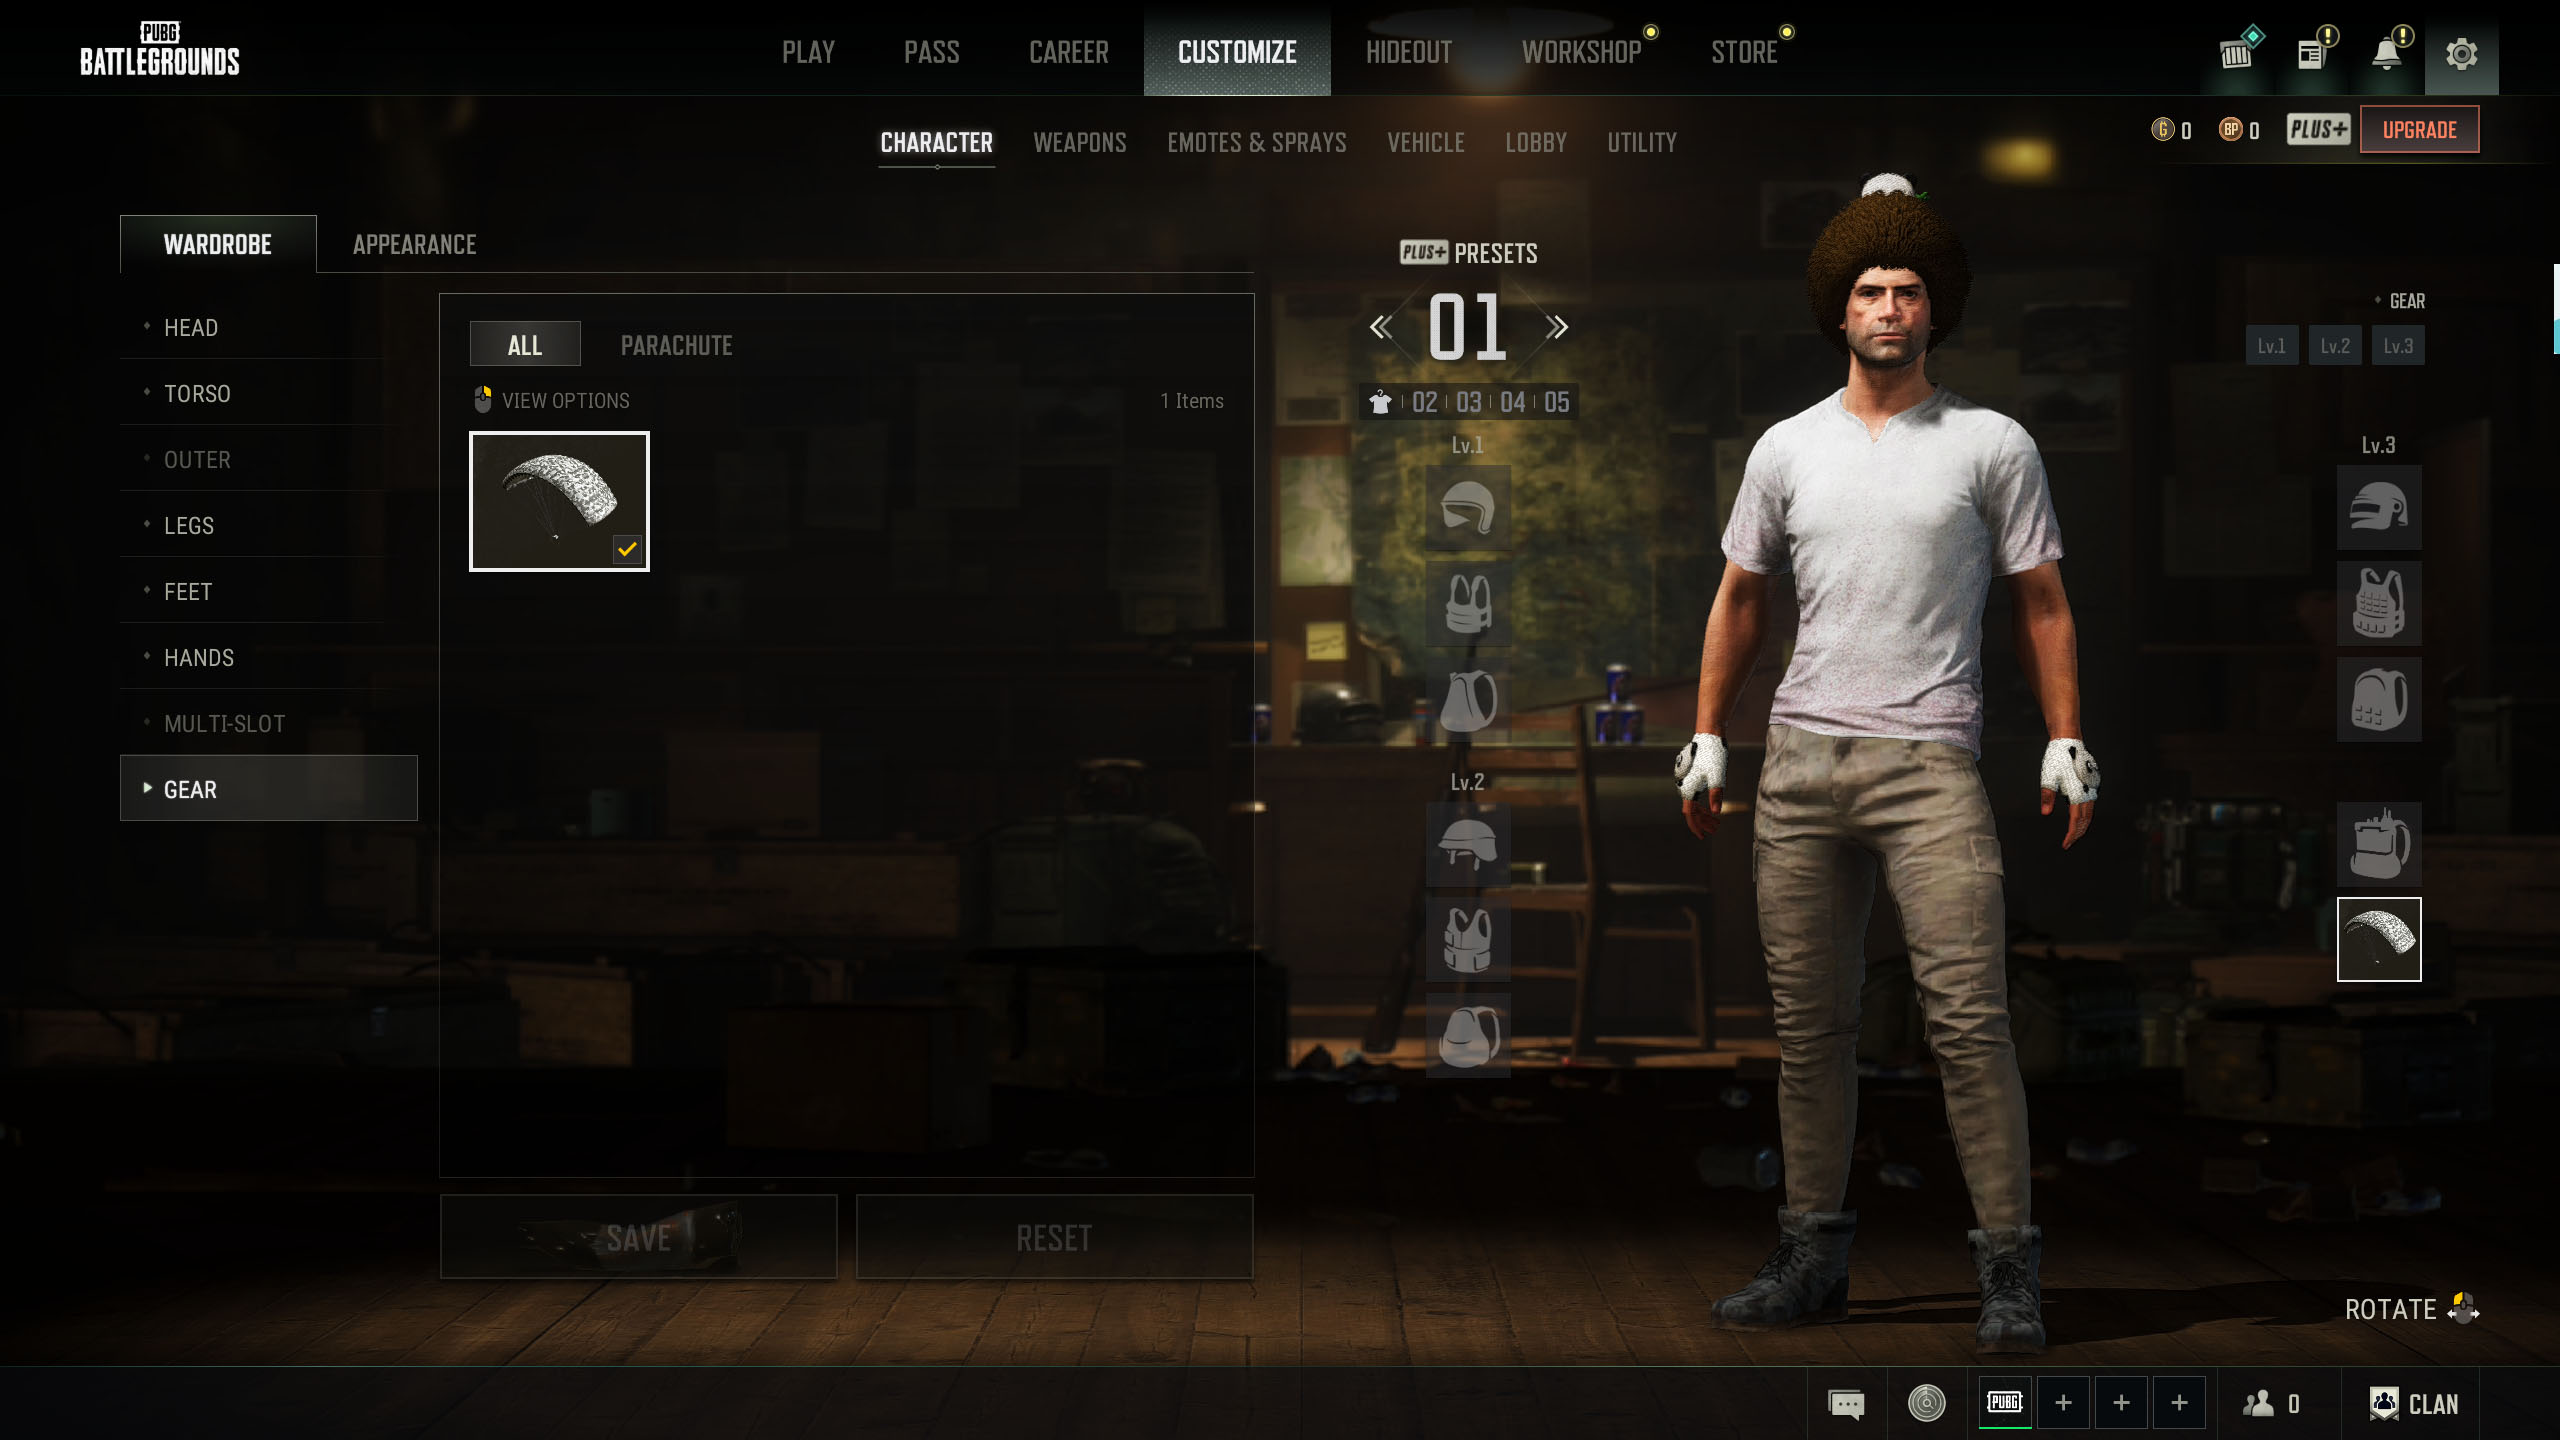 PUBG / Online Steam / Full Access / Warranty / Inactive / Gift / Game skins